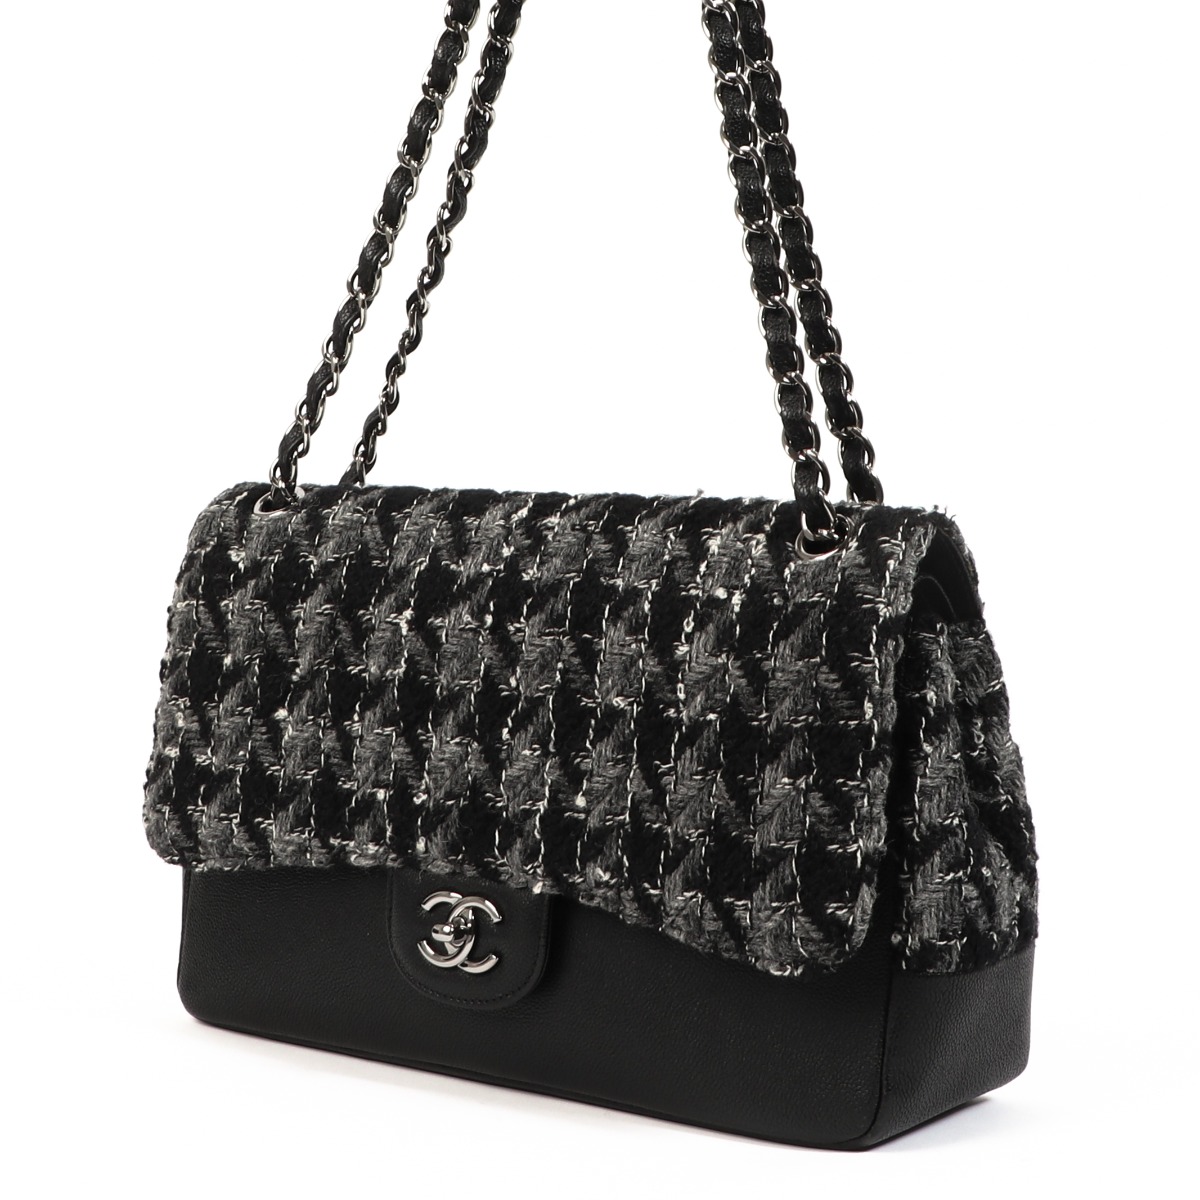 Chanel Houndstooth Tweed & Calfskin Large Classic Flap Bag